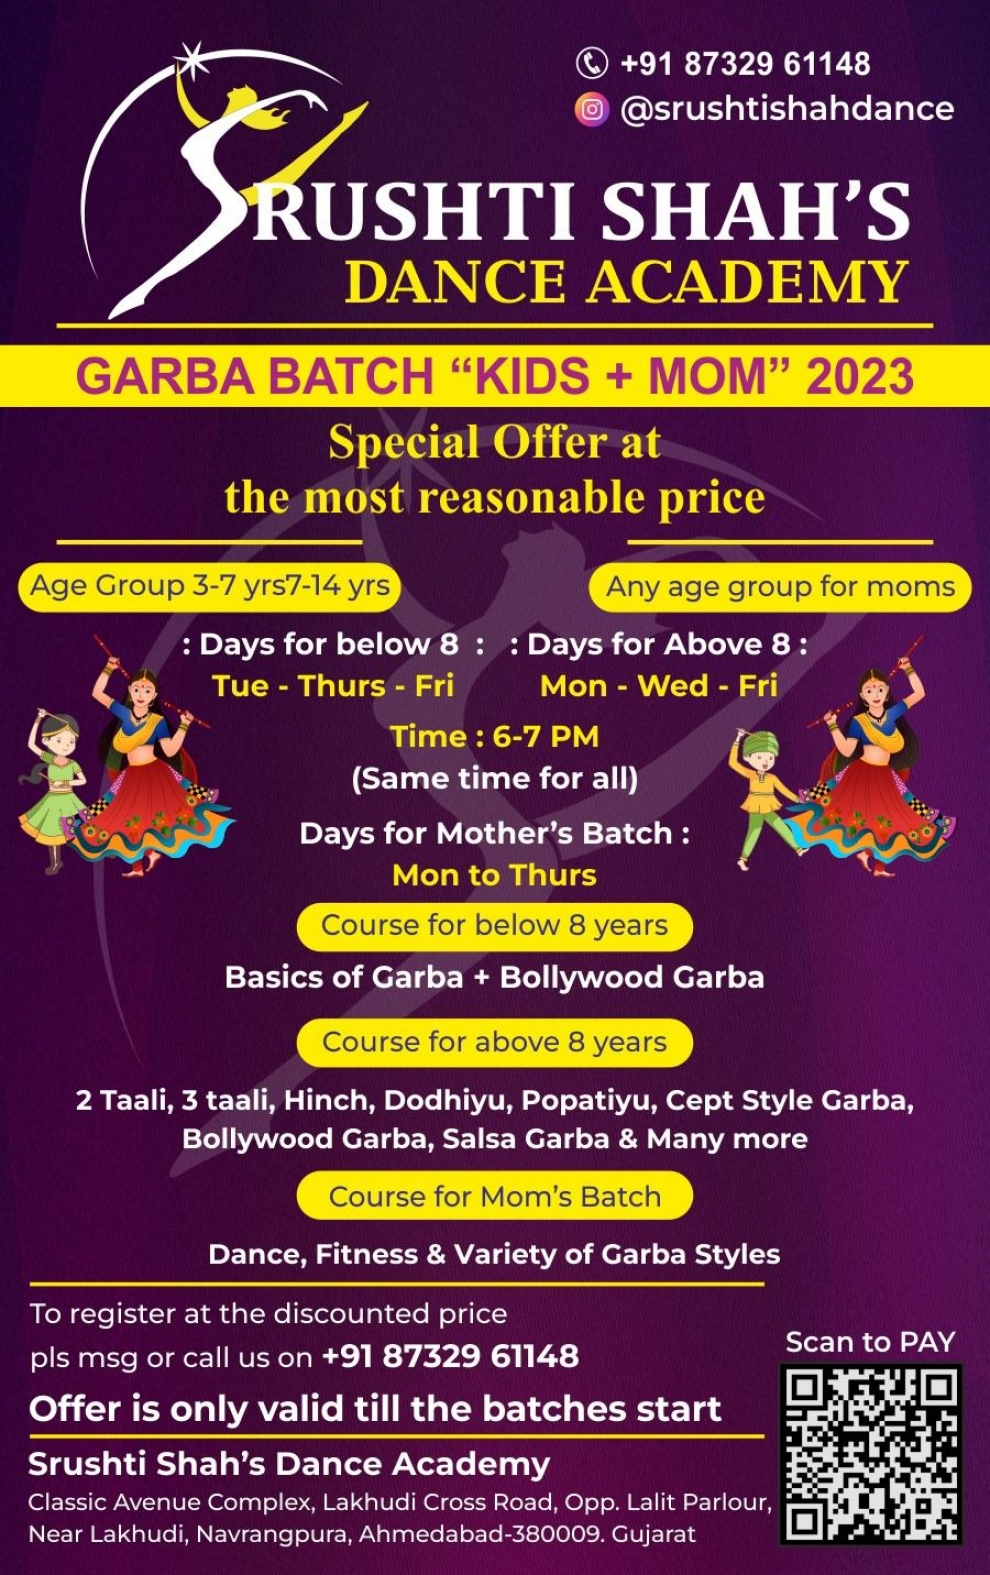 Garba Batch 2023 for Kids and Moms!